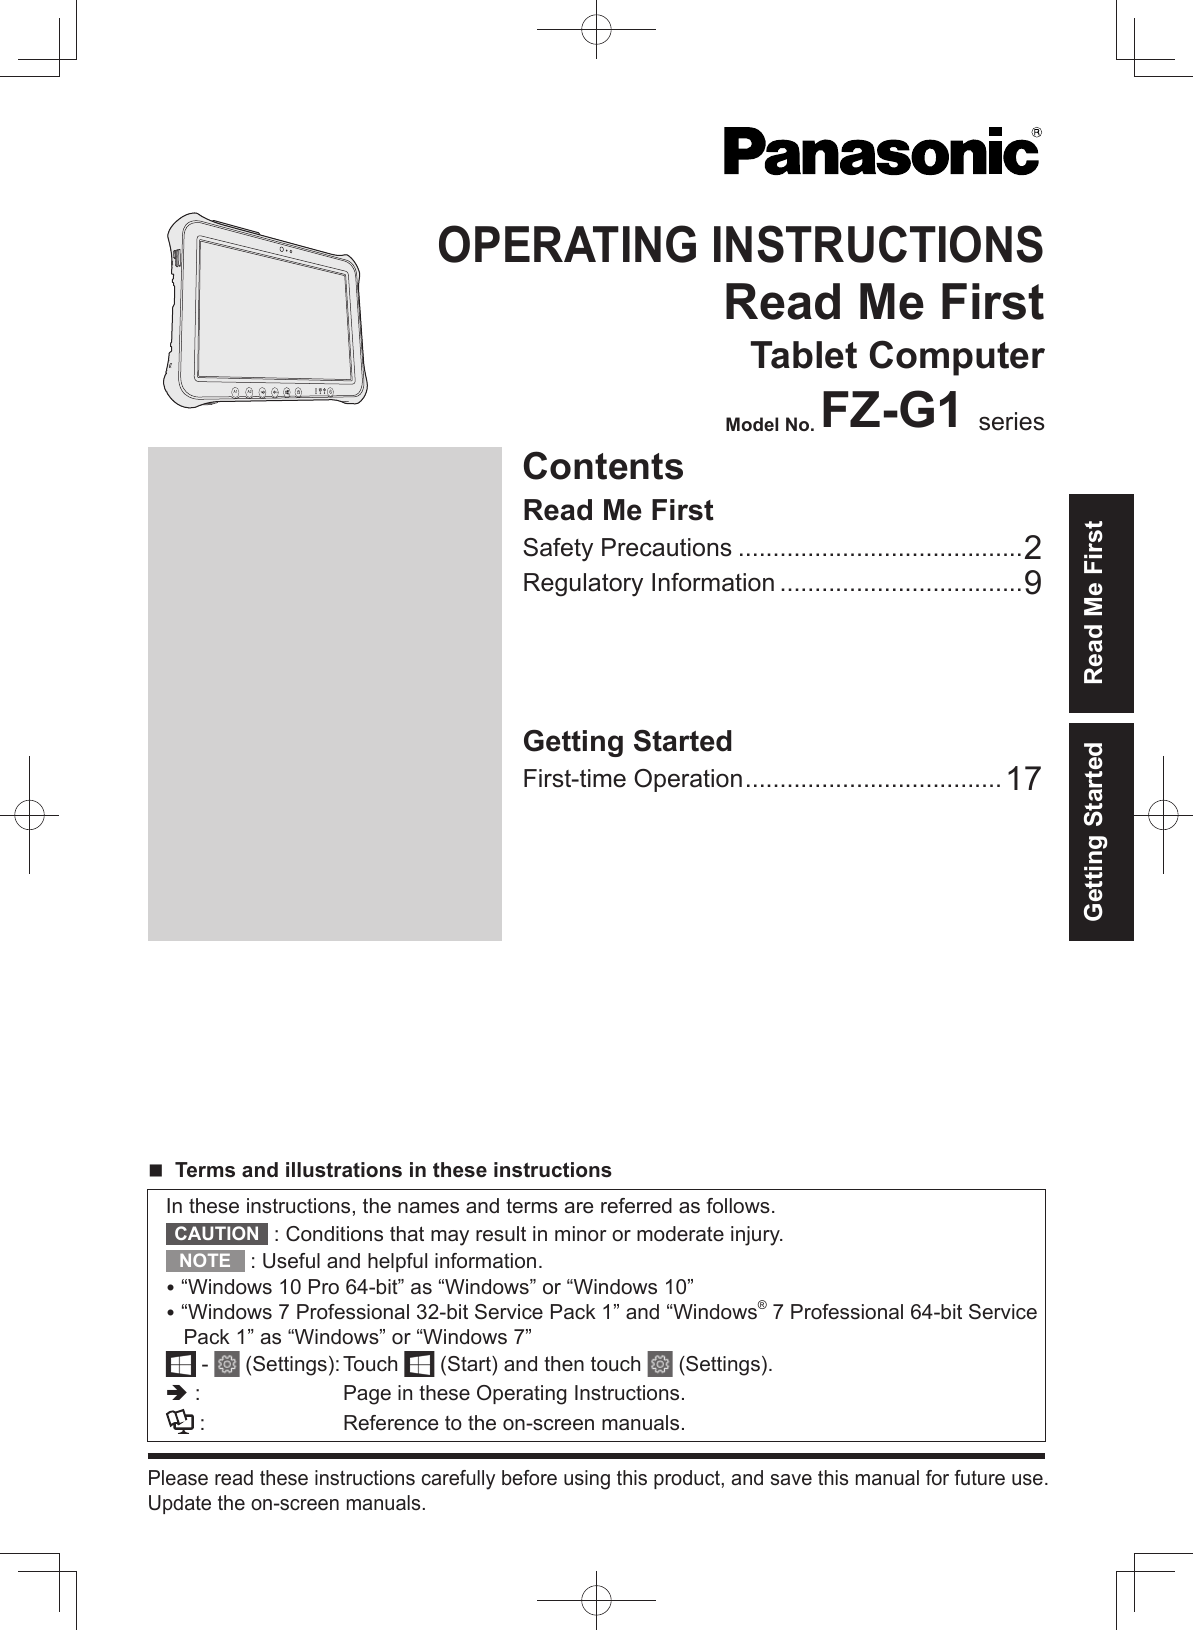 ContentsOPERATING INSTRUCTIONSRead Me FirstTablet ComputerModel No. FZ-G1 seriesGetting StartedFirst-time Operation .....................................17Read Me FirstSafety Precautions .........................................2Regulatory Information ...................................9A2A1Please read these instructions carefully before using this product, and save this manual for future use.Update the on-screen manuals.In these instructions, the names and terms are referred as follows.CAUTION  : Conditions that may result in minor or moderate injury.NOTE  : Useful and helpful information. “Windows 10 Pro 64-bit” as “Windows” or “Windows 10” “Windows 7 Professional 32-bit Service Pack 1” and “Windows® 7 Professional 64-bit Service Pack 1” as “Windows” or “Windows 7” -   (Settings): Touch   (Start) and then touch   (Settings). :  Page in these Operating Instructions. :  Reference to the on-screen manuals. Terms and illustrations in these instructionsGetting Started Read Me First